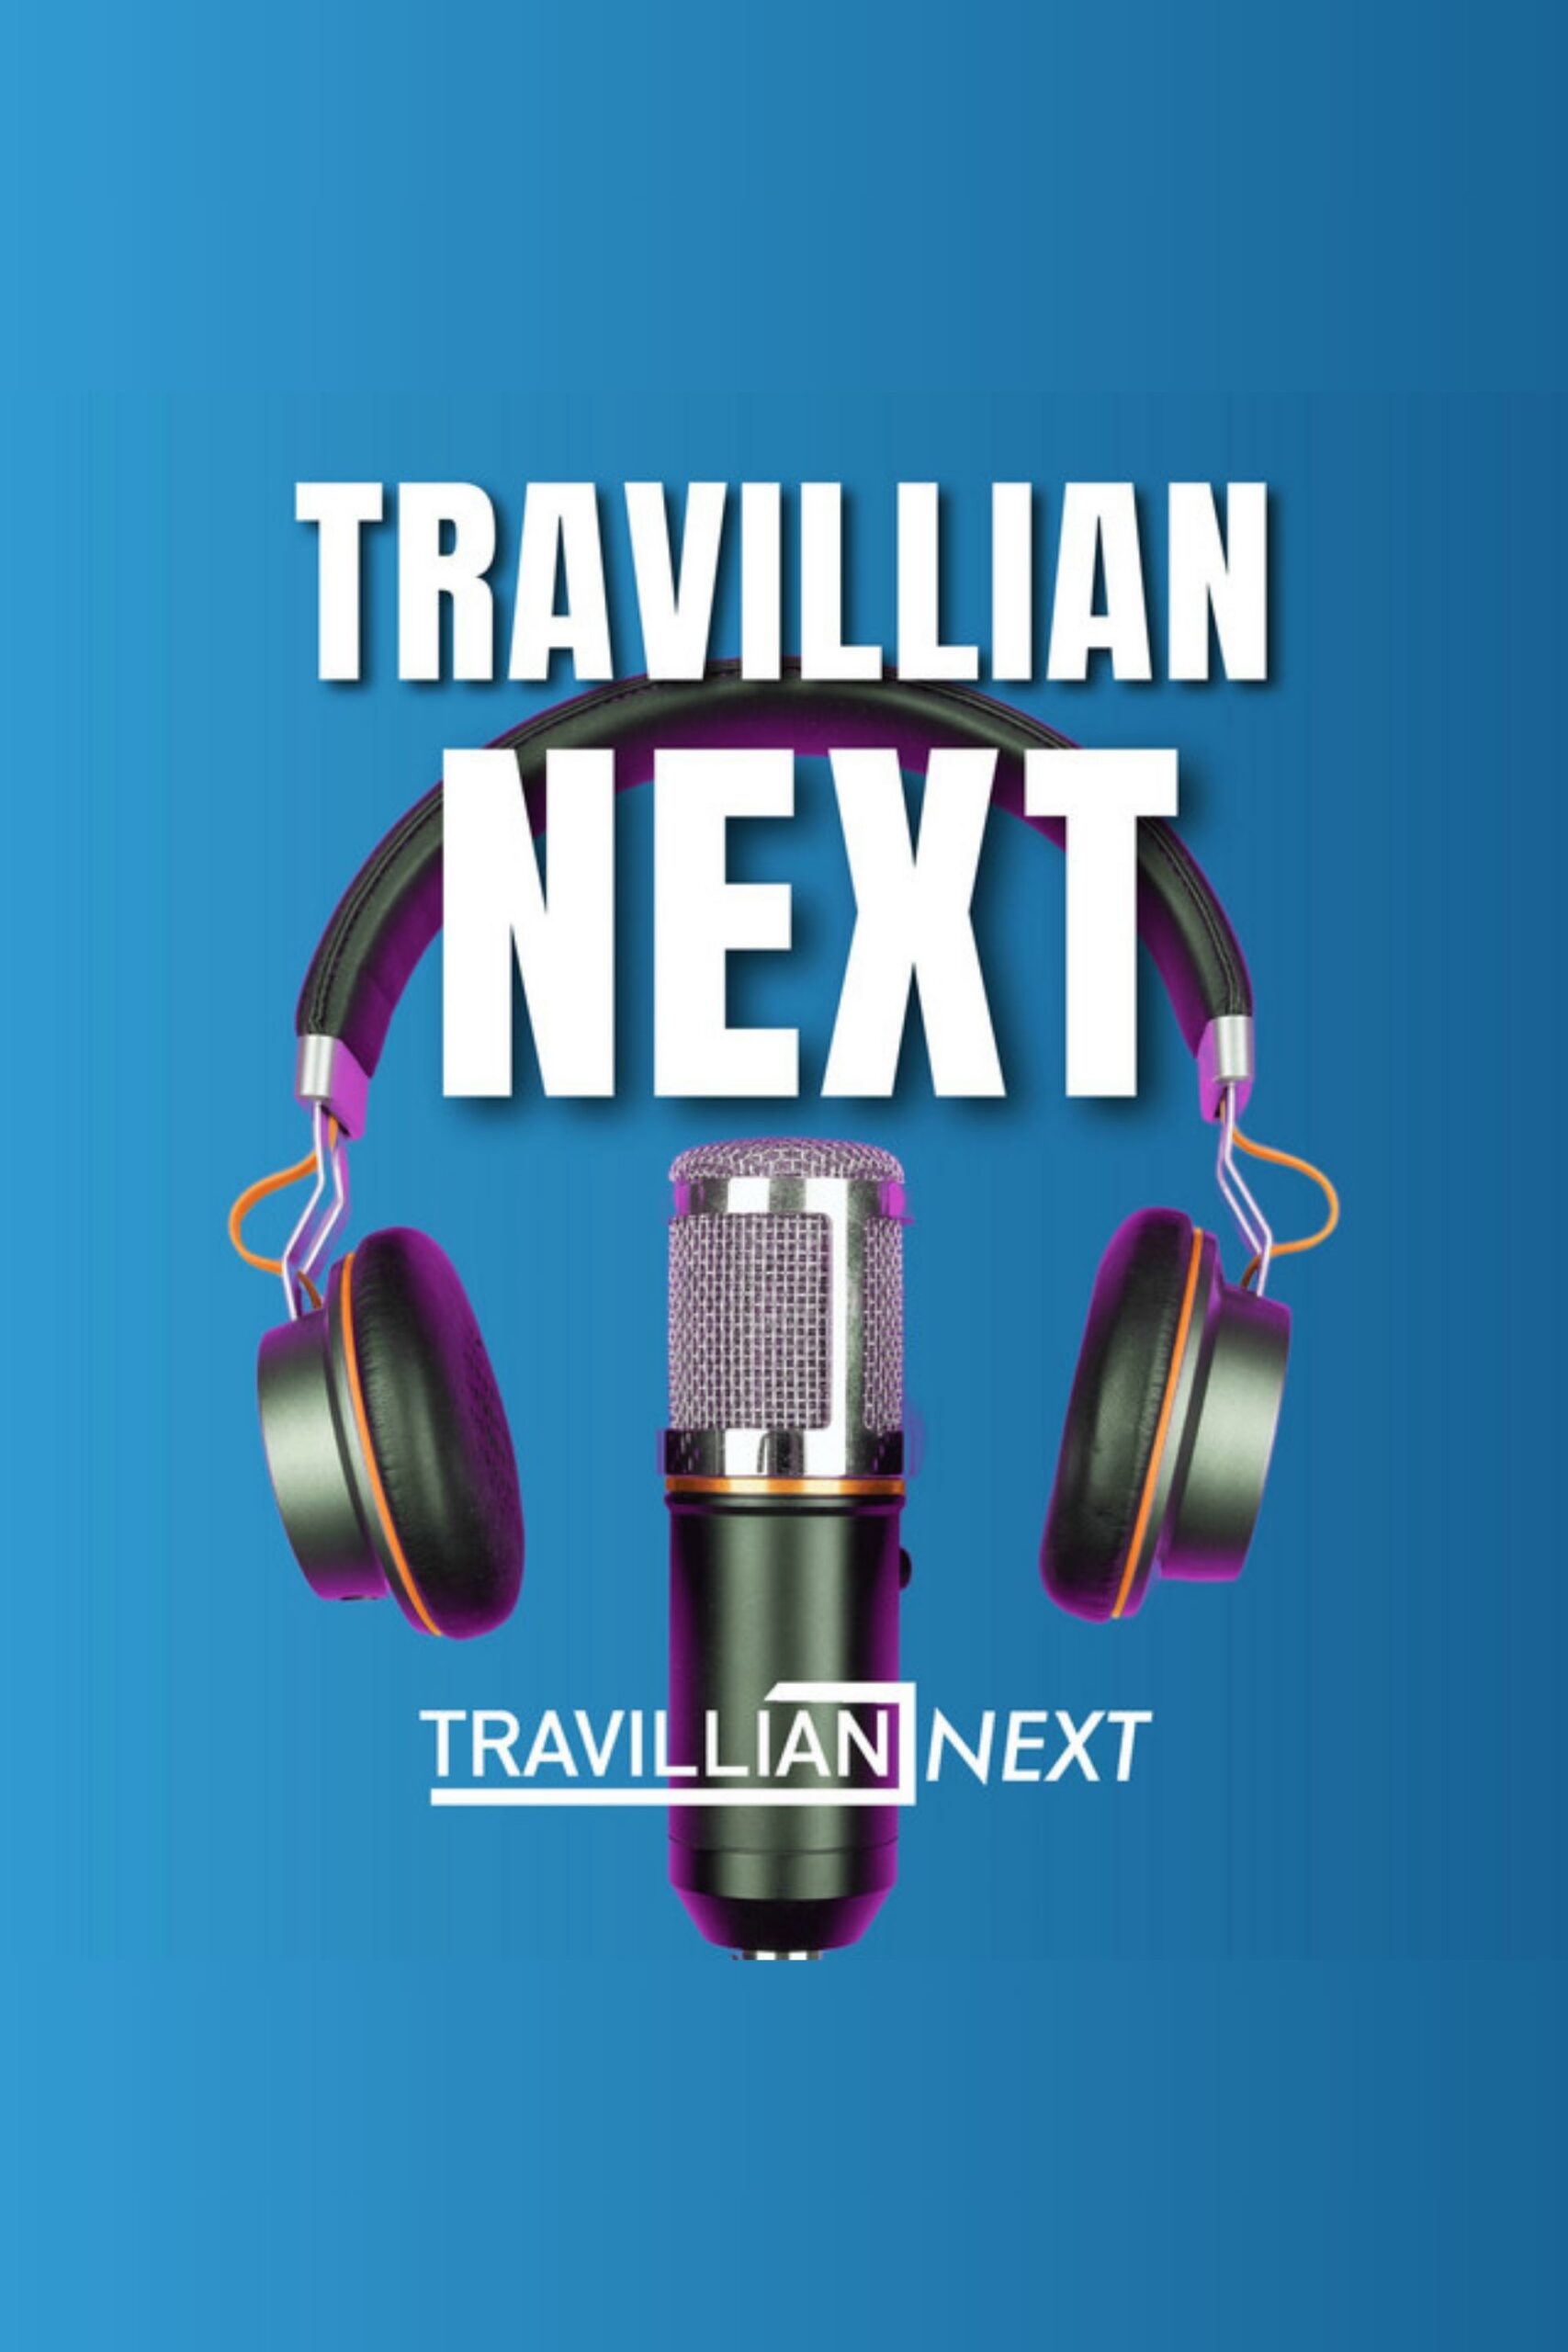 Travillian Next Ad long Ex1 scaled